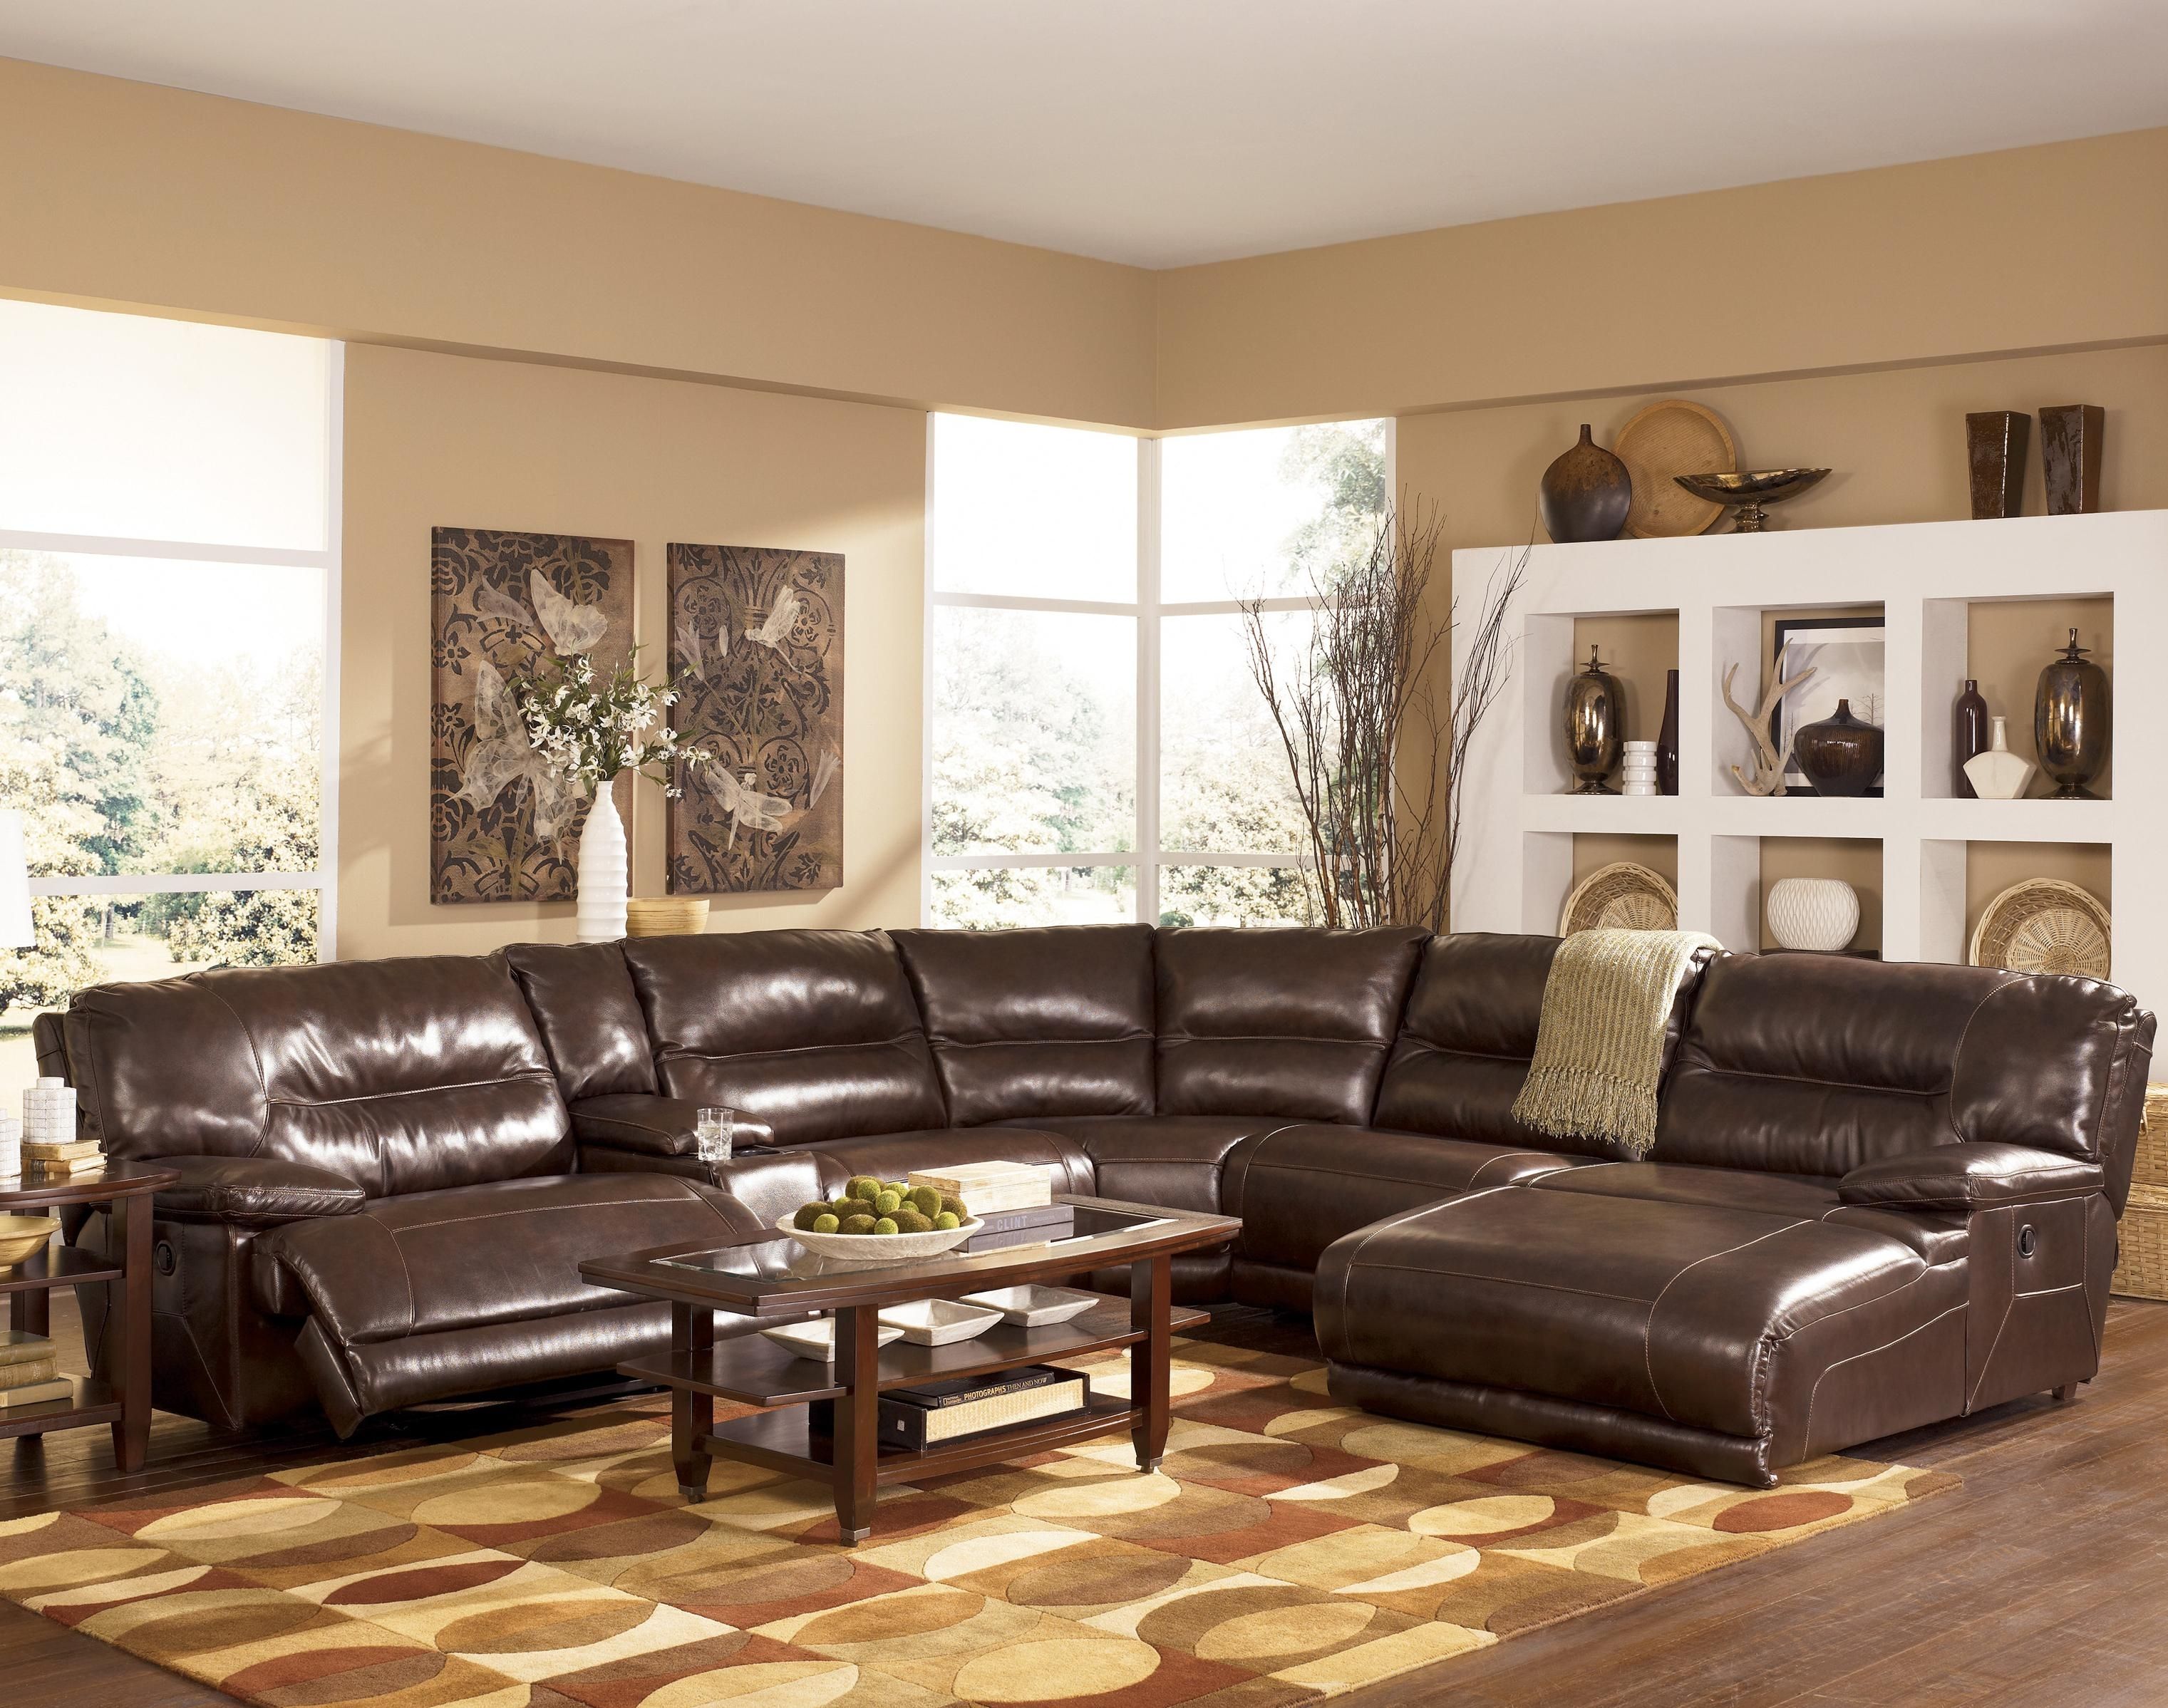 Signature Designashley Exhilaration – Chocolate Contemporary For Erie Pa Sectional Sofas (View 3 of 10)